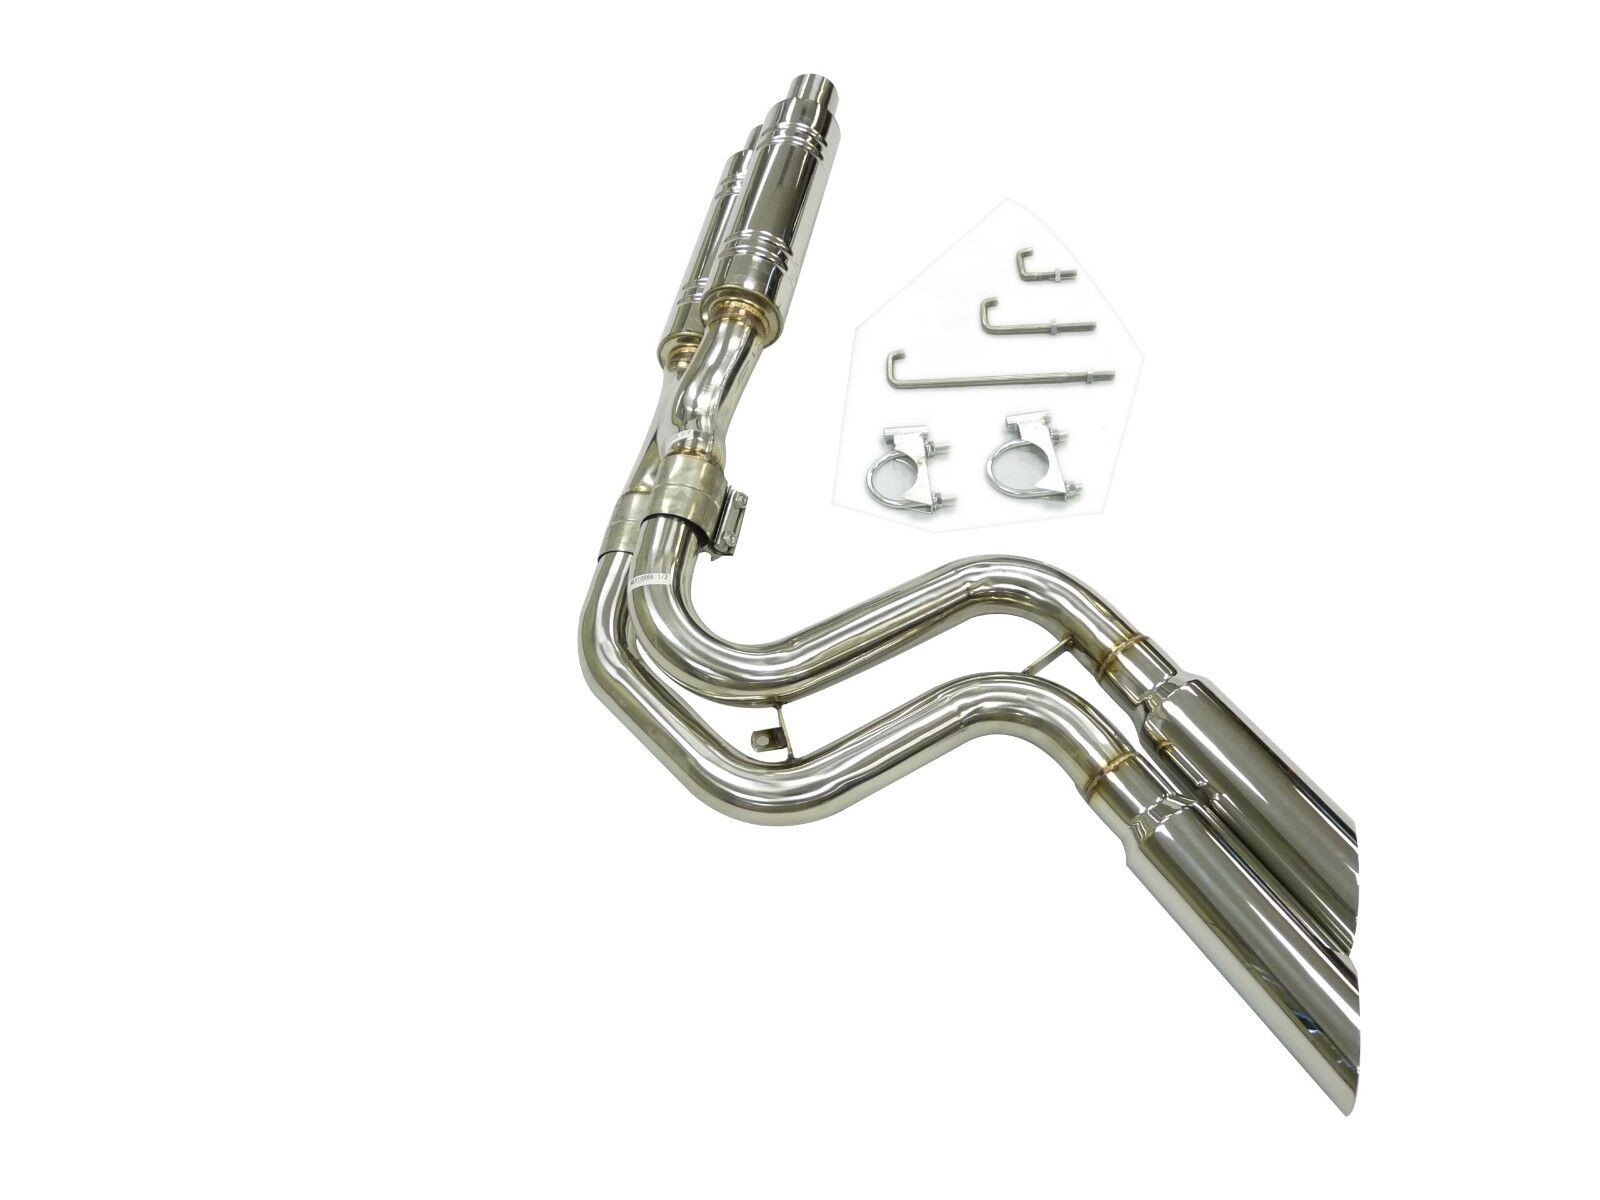 Maximizer Catback Exhaust Fits For 1999 to 2003 Ford F-150 Lightning 5.4L 